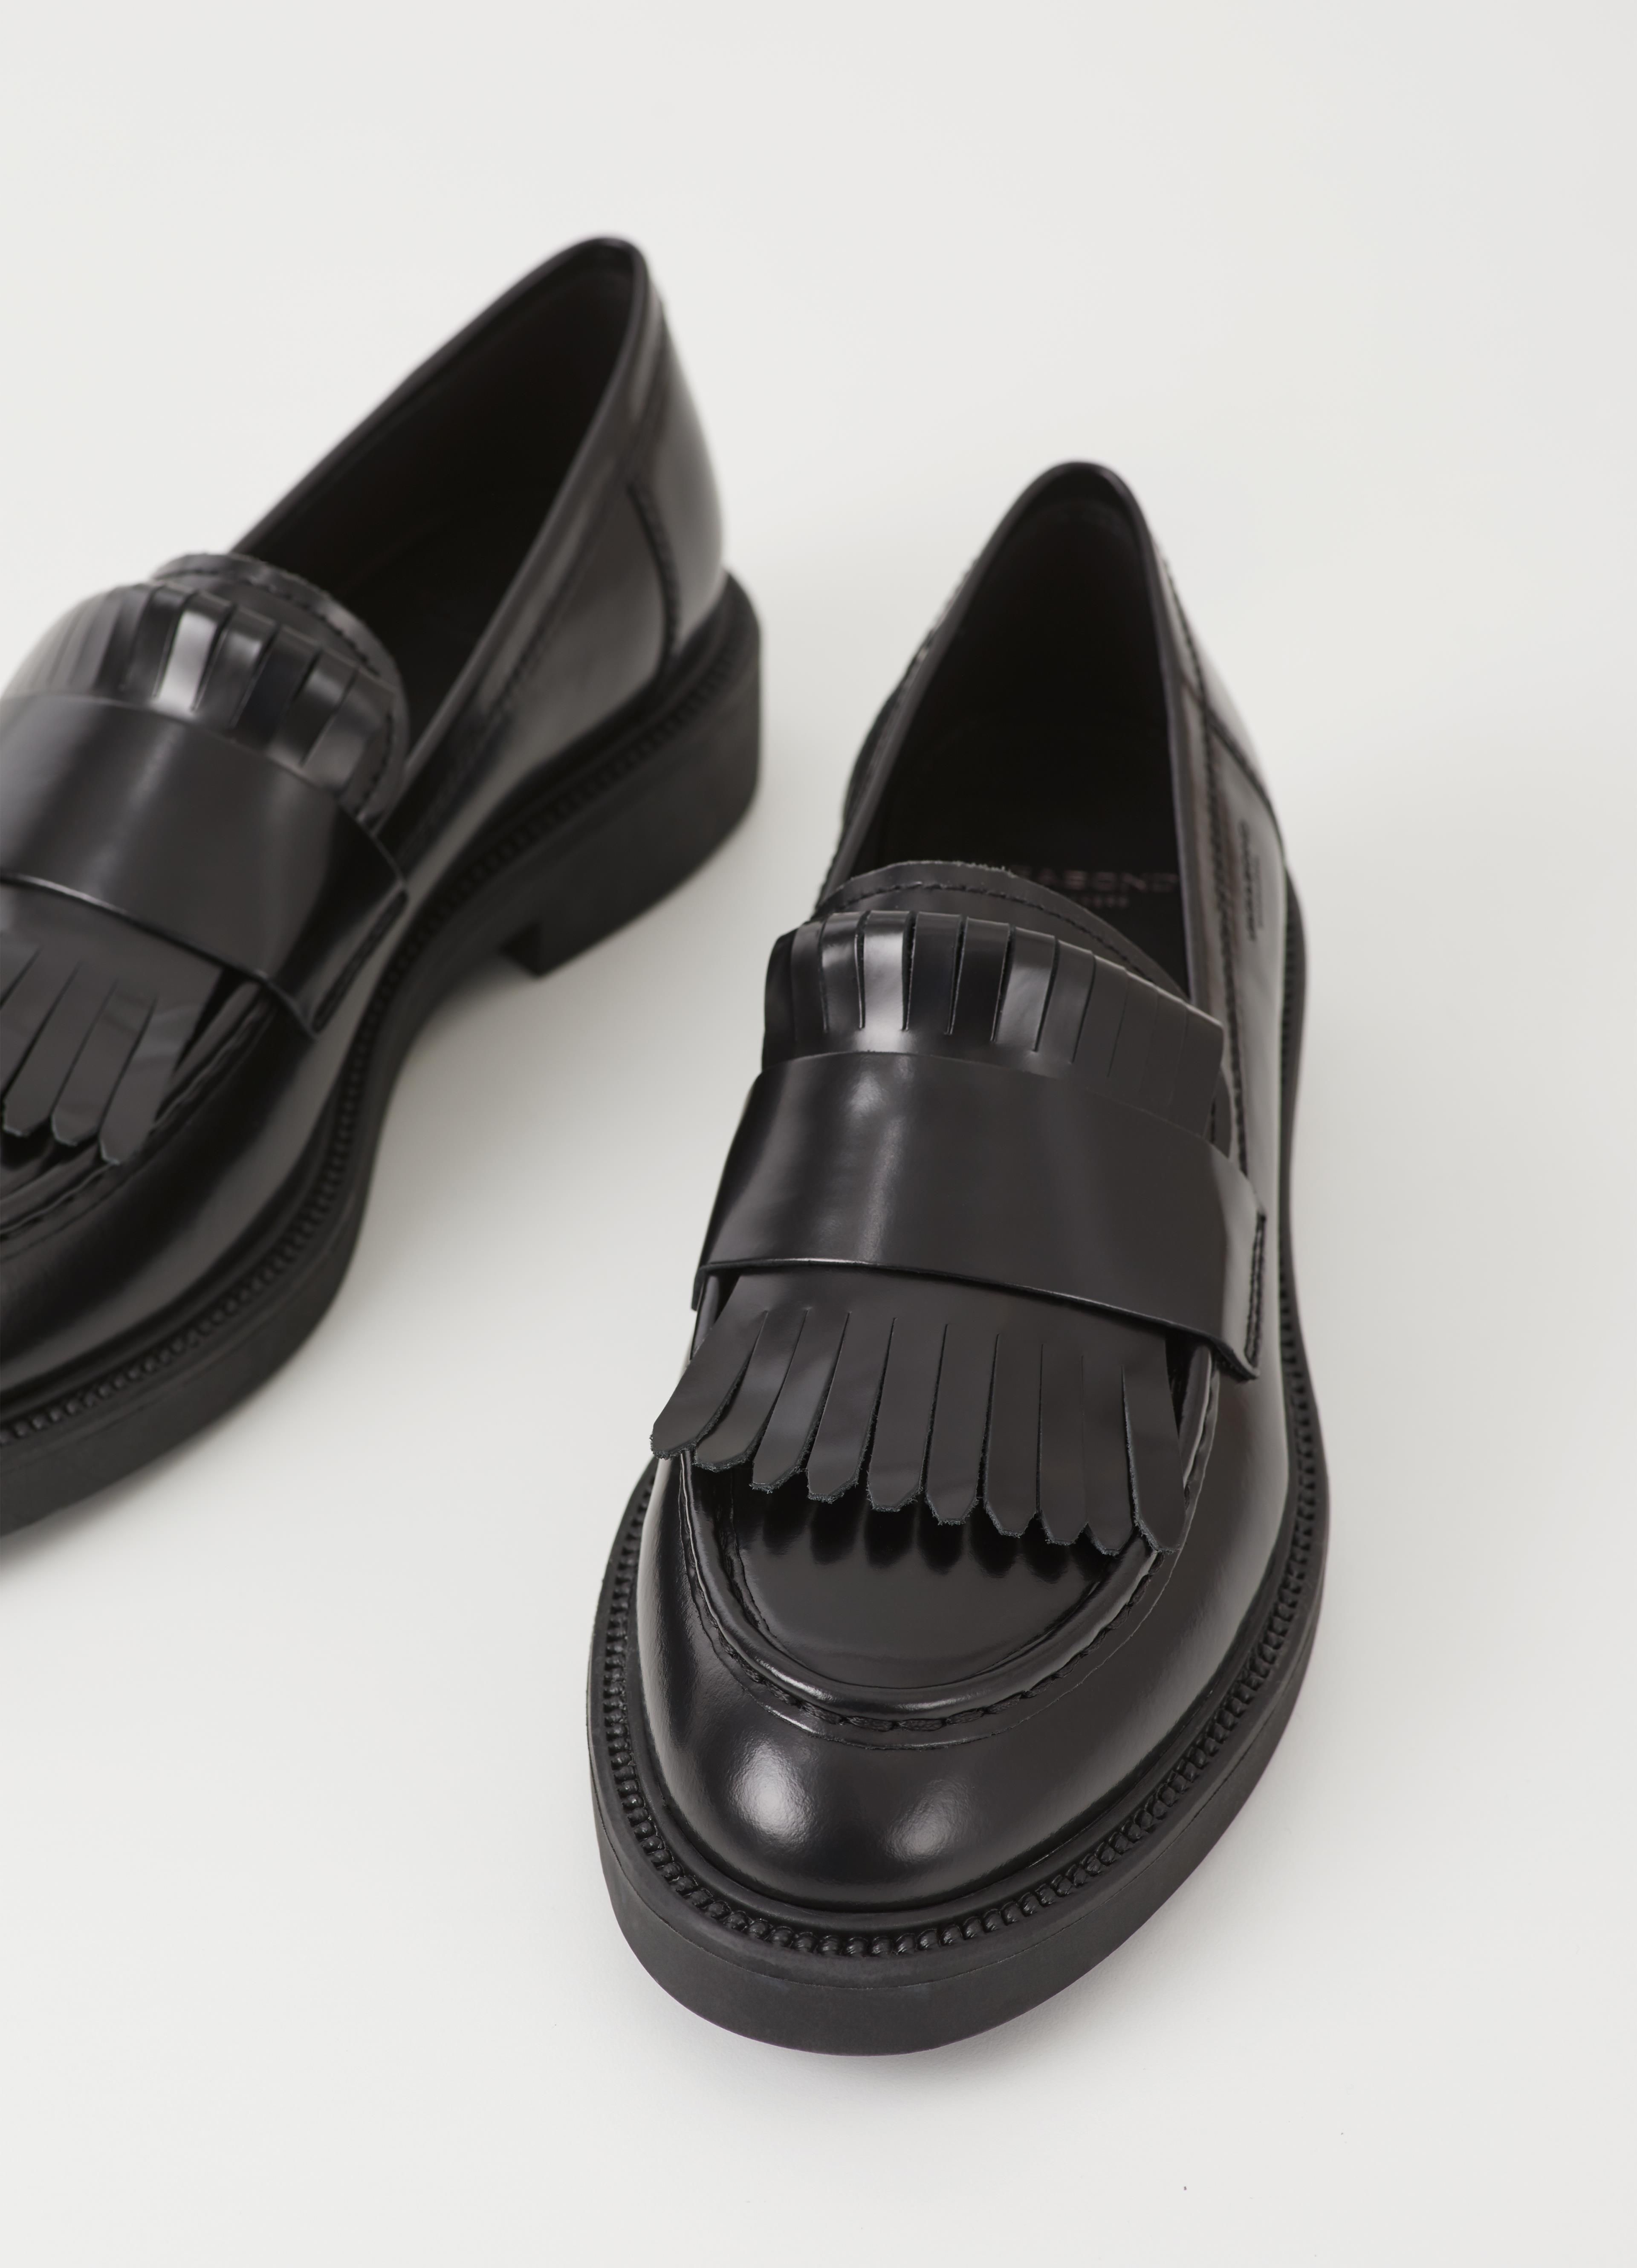 Steep Migration Constitution 9 Best Loafers for Women 2022 | The Strategist